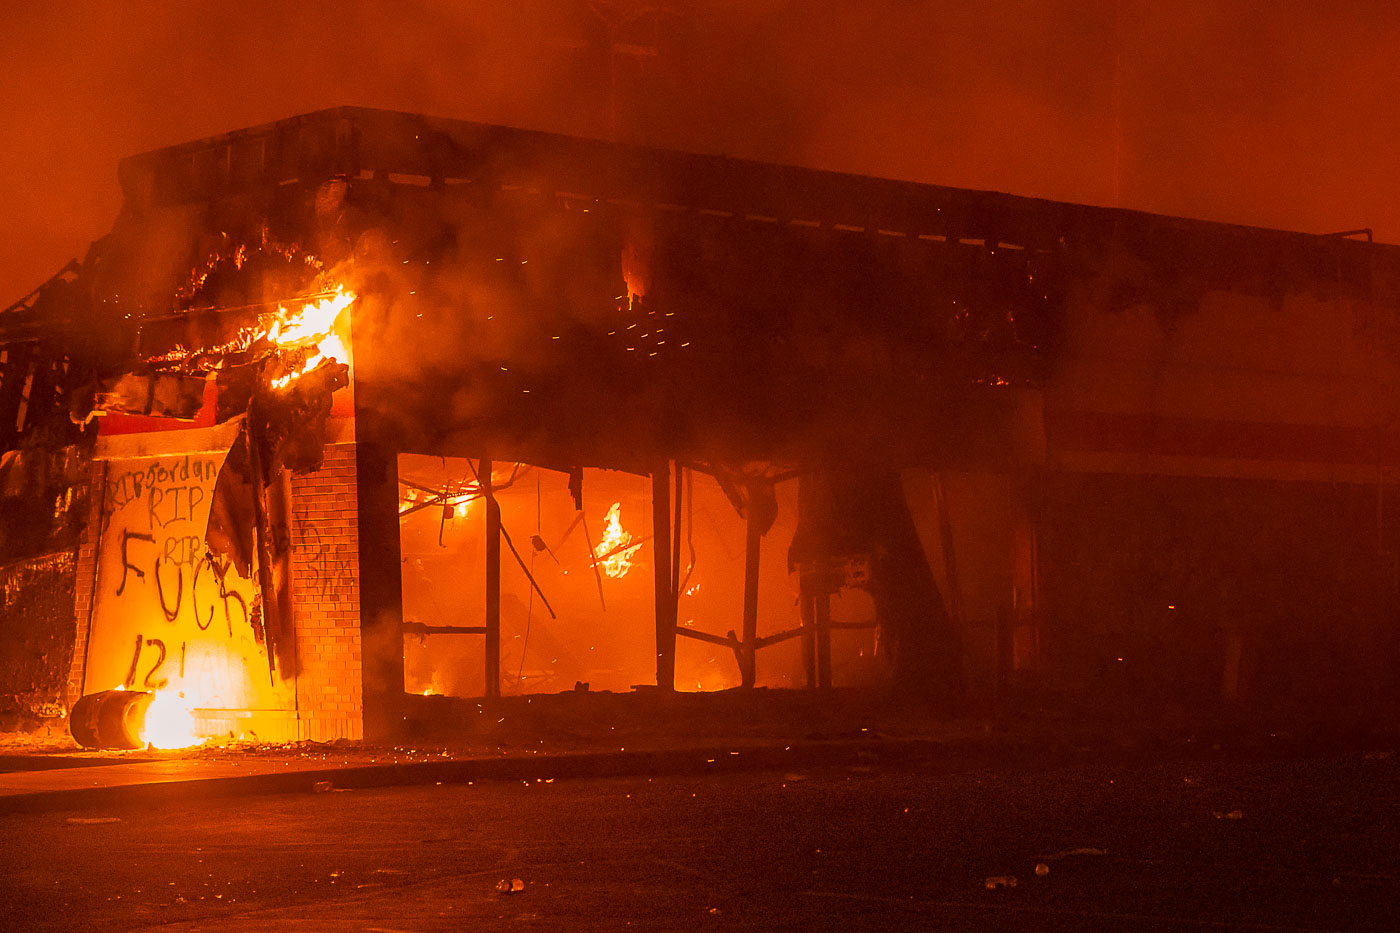 AutoZone store on fire during Minneapolis George Floyd protests